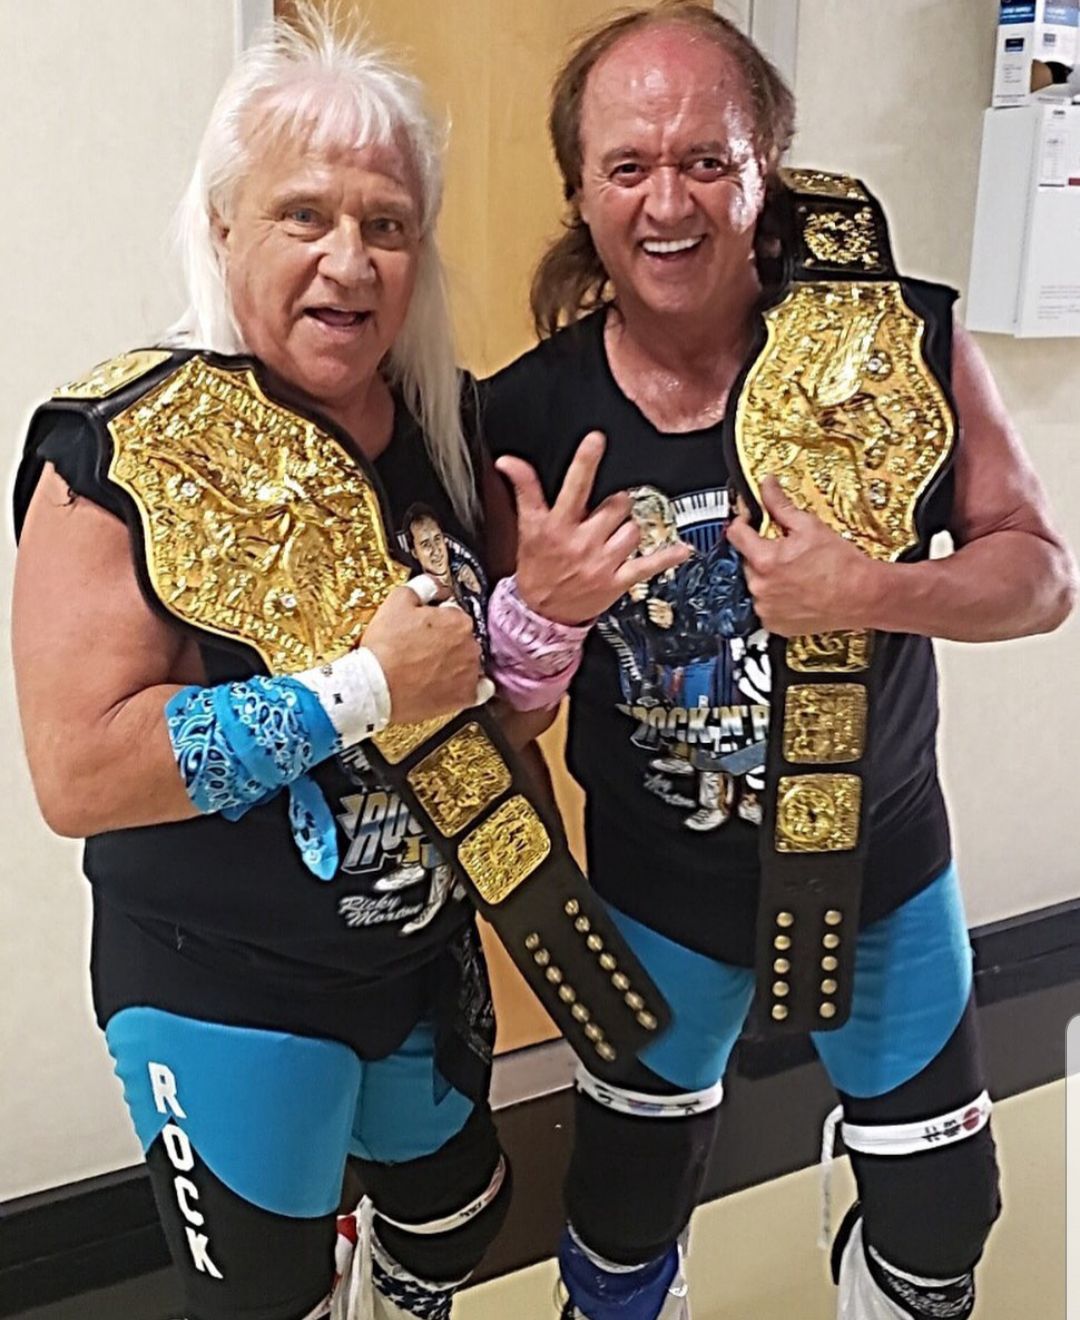 Image result for rock n roll express nwa